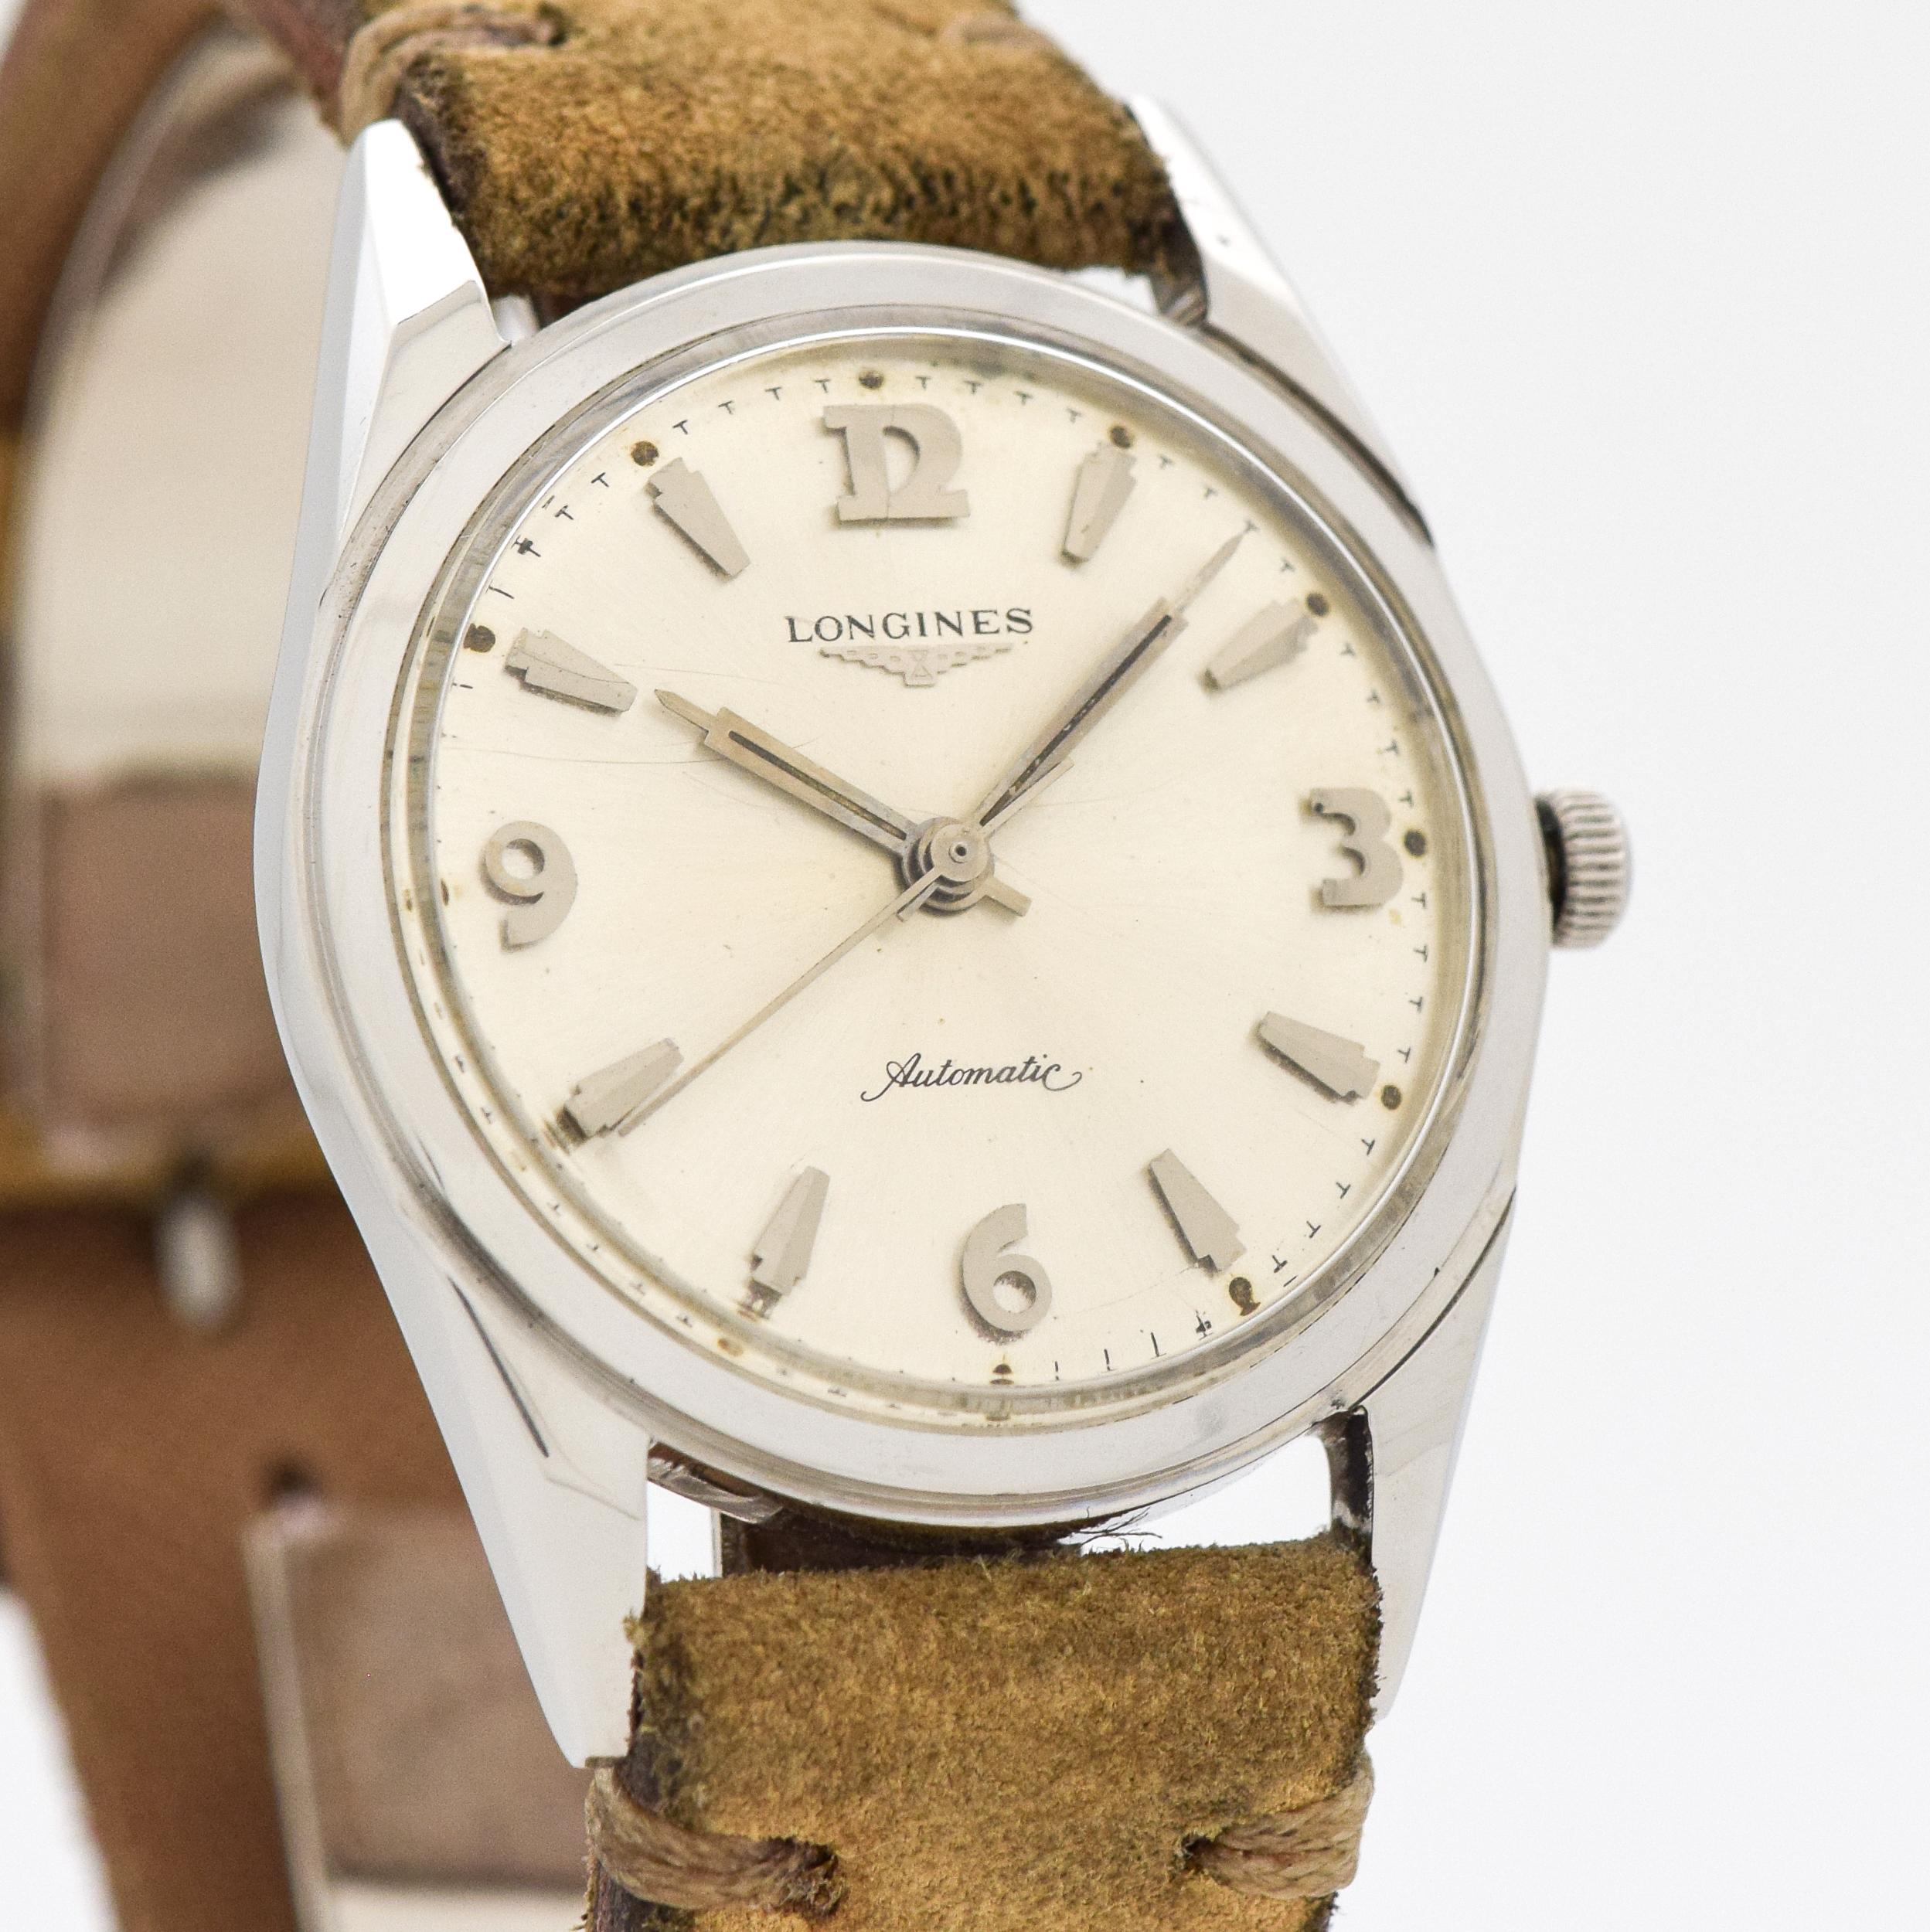 1961 Vintage Longines Ref. 2534 Stainless Steel watch with Original Silver Dial with Applied Steel Arabic 3, 6, 9, and 12 with Beveled Arrow Markers. 34mm x 42mm lug to lug (1.34 in. x 1.65 in.) - 17 jewel, automatic caliber movement. Equipped with